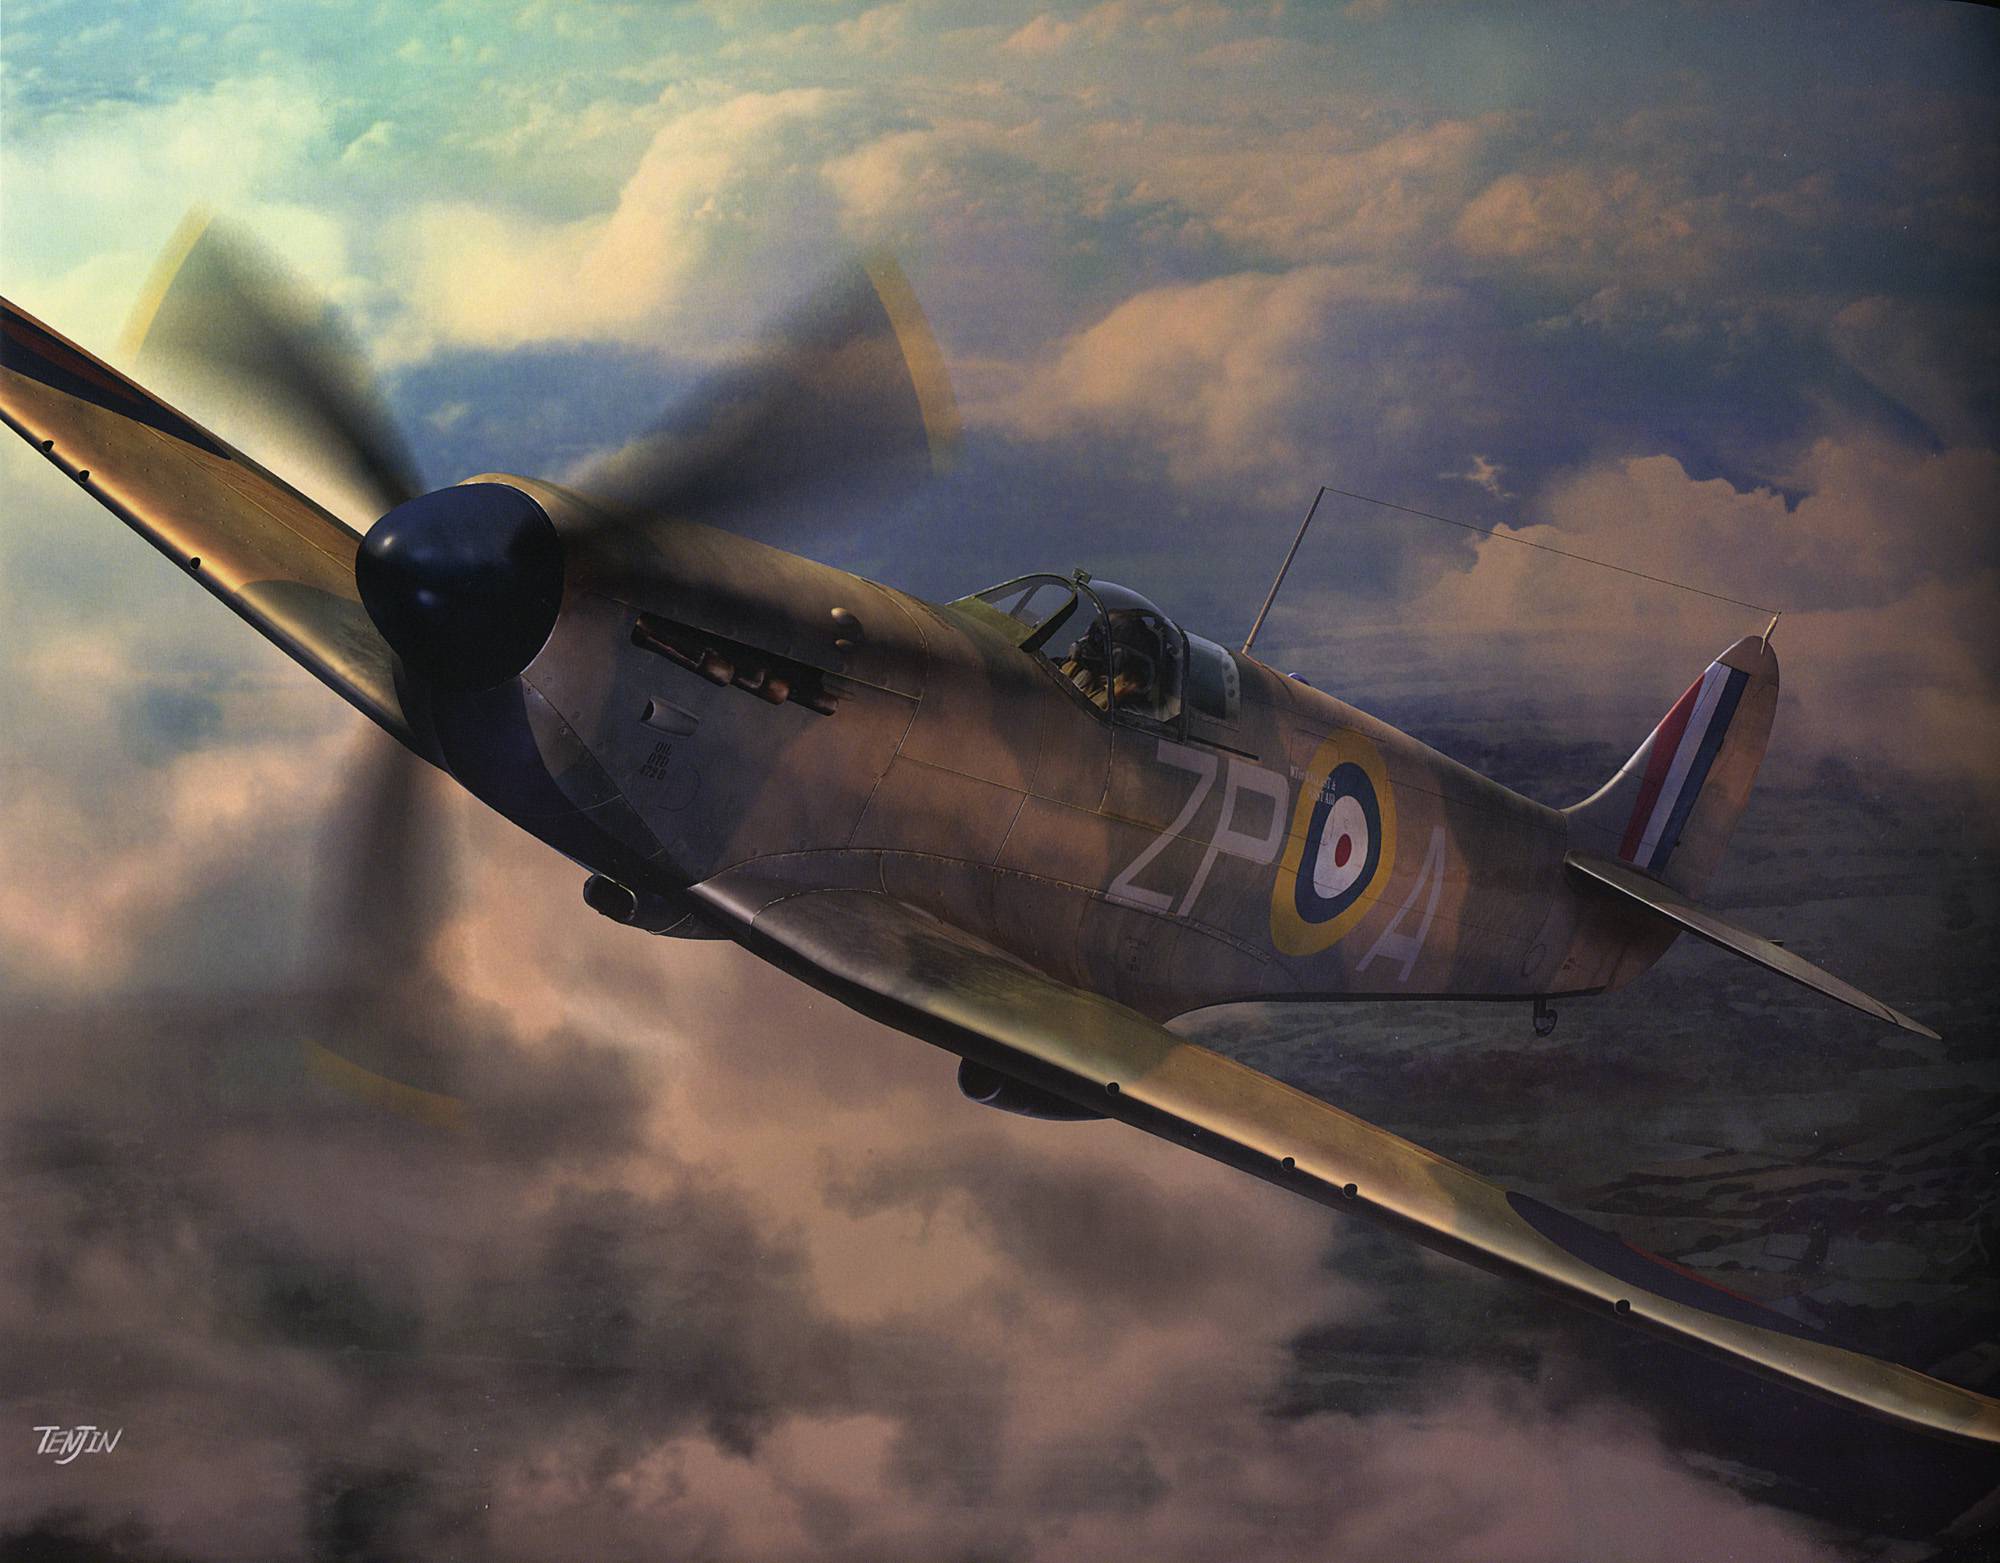 WW2 Wallpaper, WW2 Image for Windows and Mac Systems